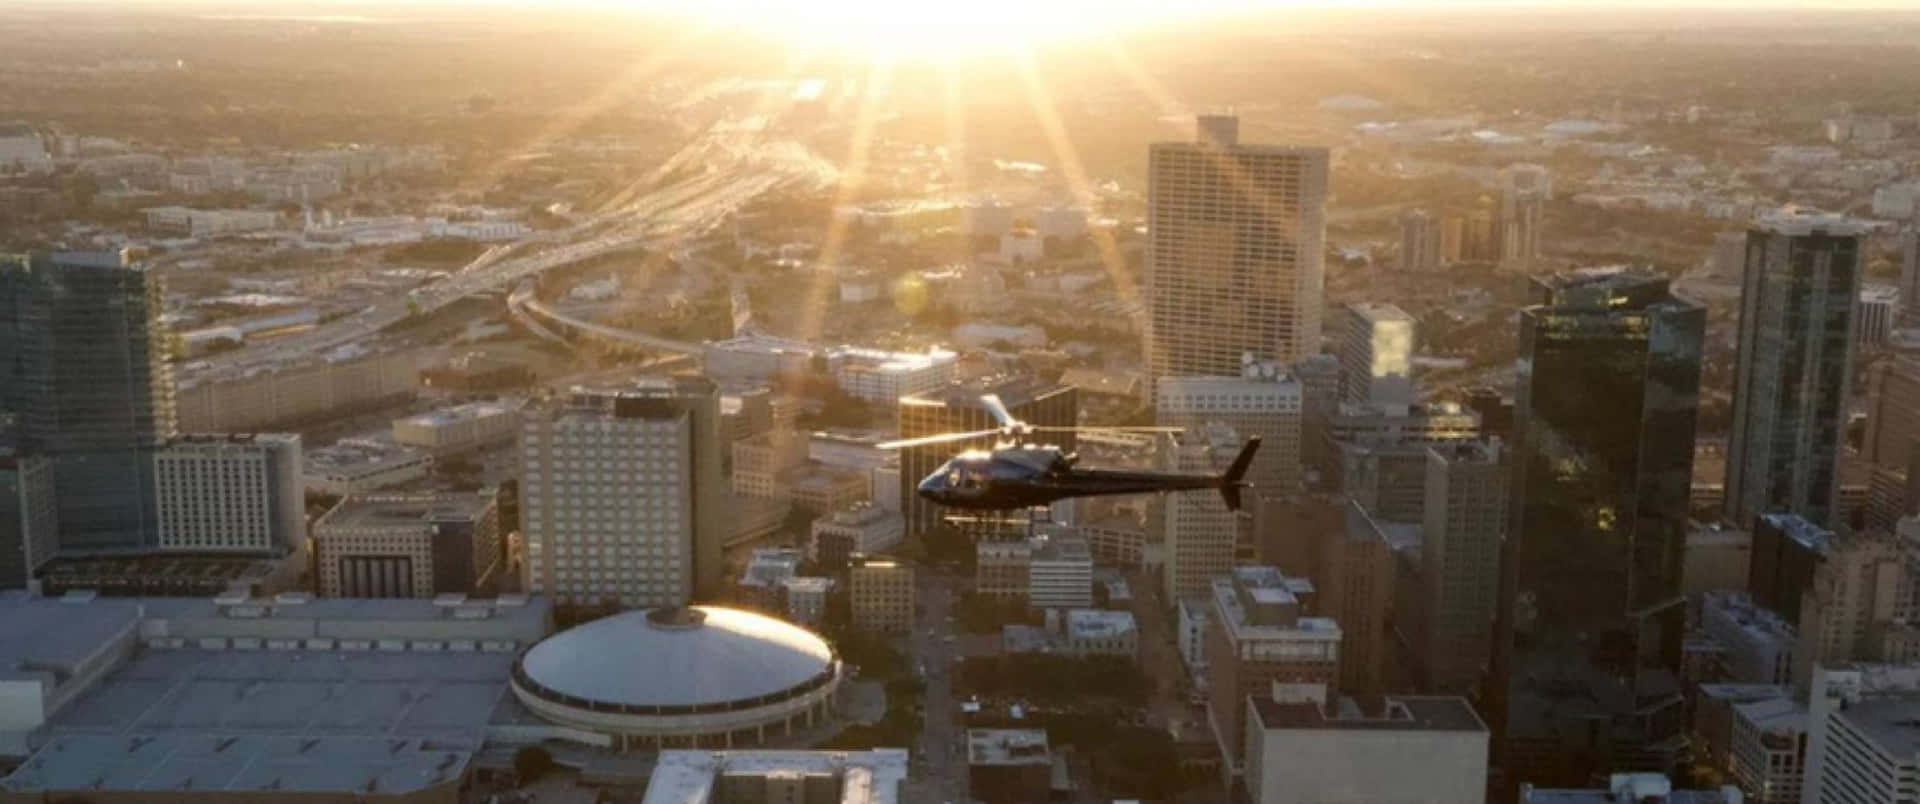 Tour the Skies Aboard a Helicopter